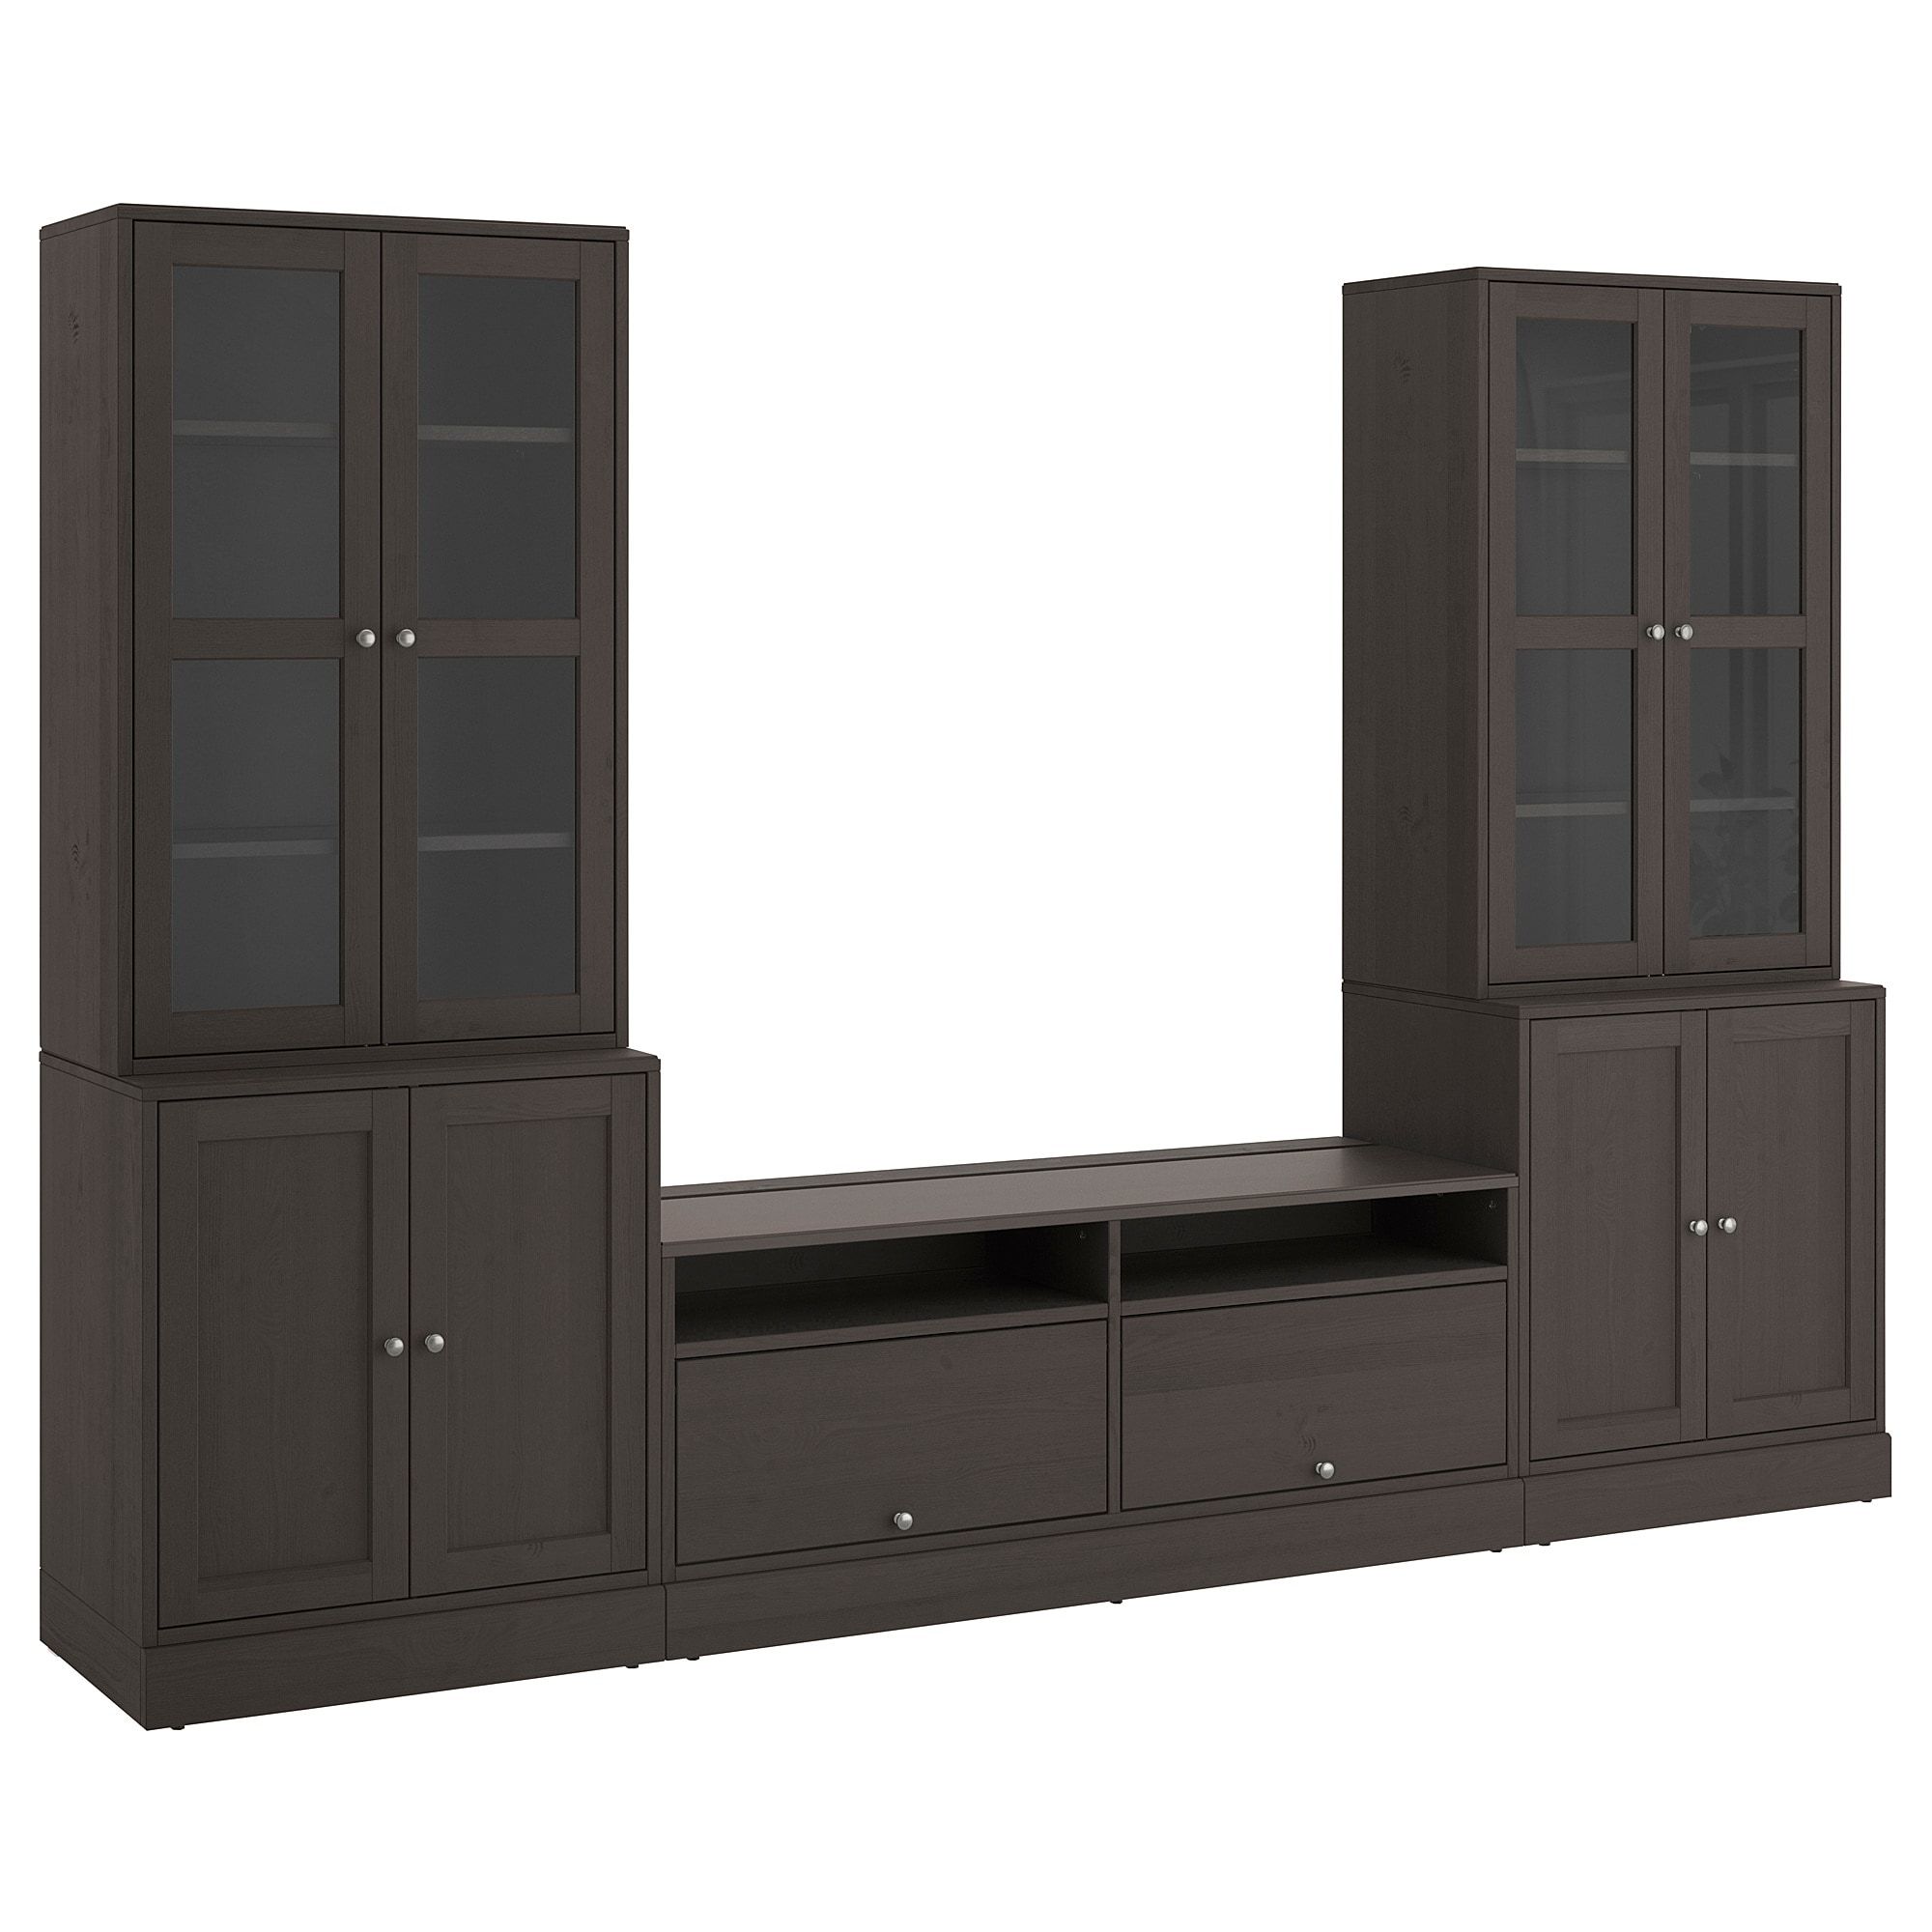 Tv Wall Cabinets In Famous Tv Storage Units & Tv Wall Units (View 19 of 20)